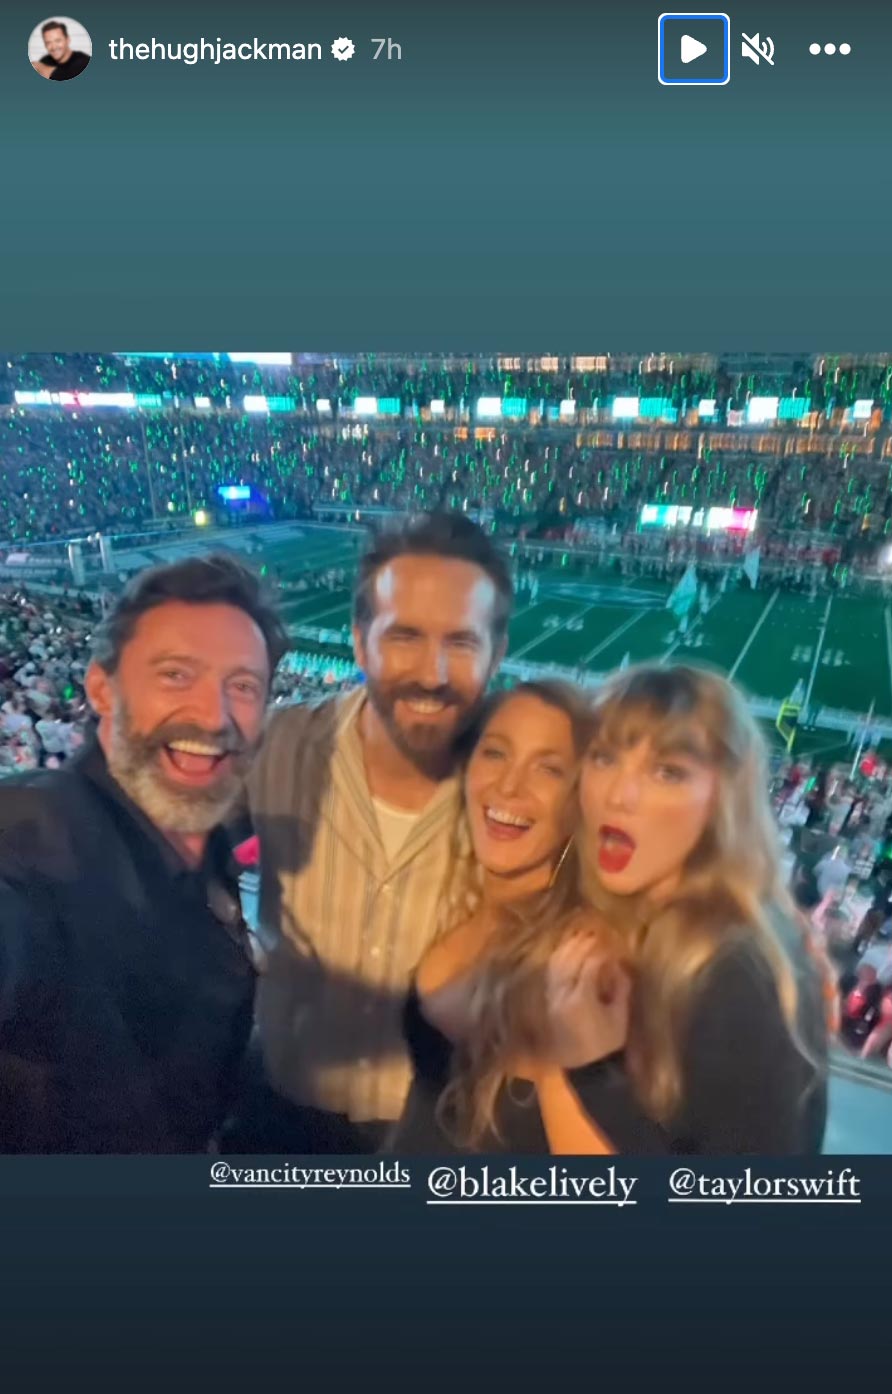 Hugh Jackman Proves He Had the Time of His Life at the Chiefs Games With Star-Studded Selfies